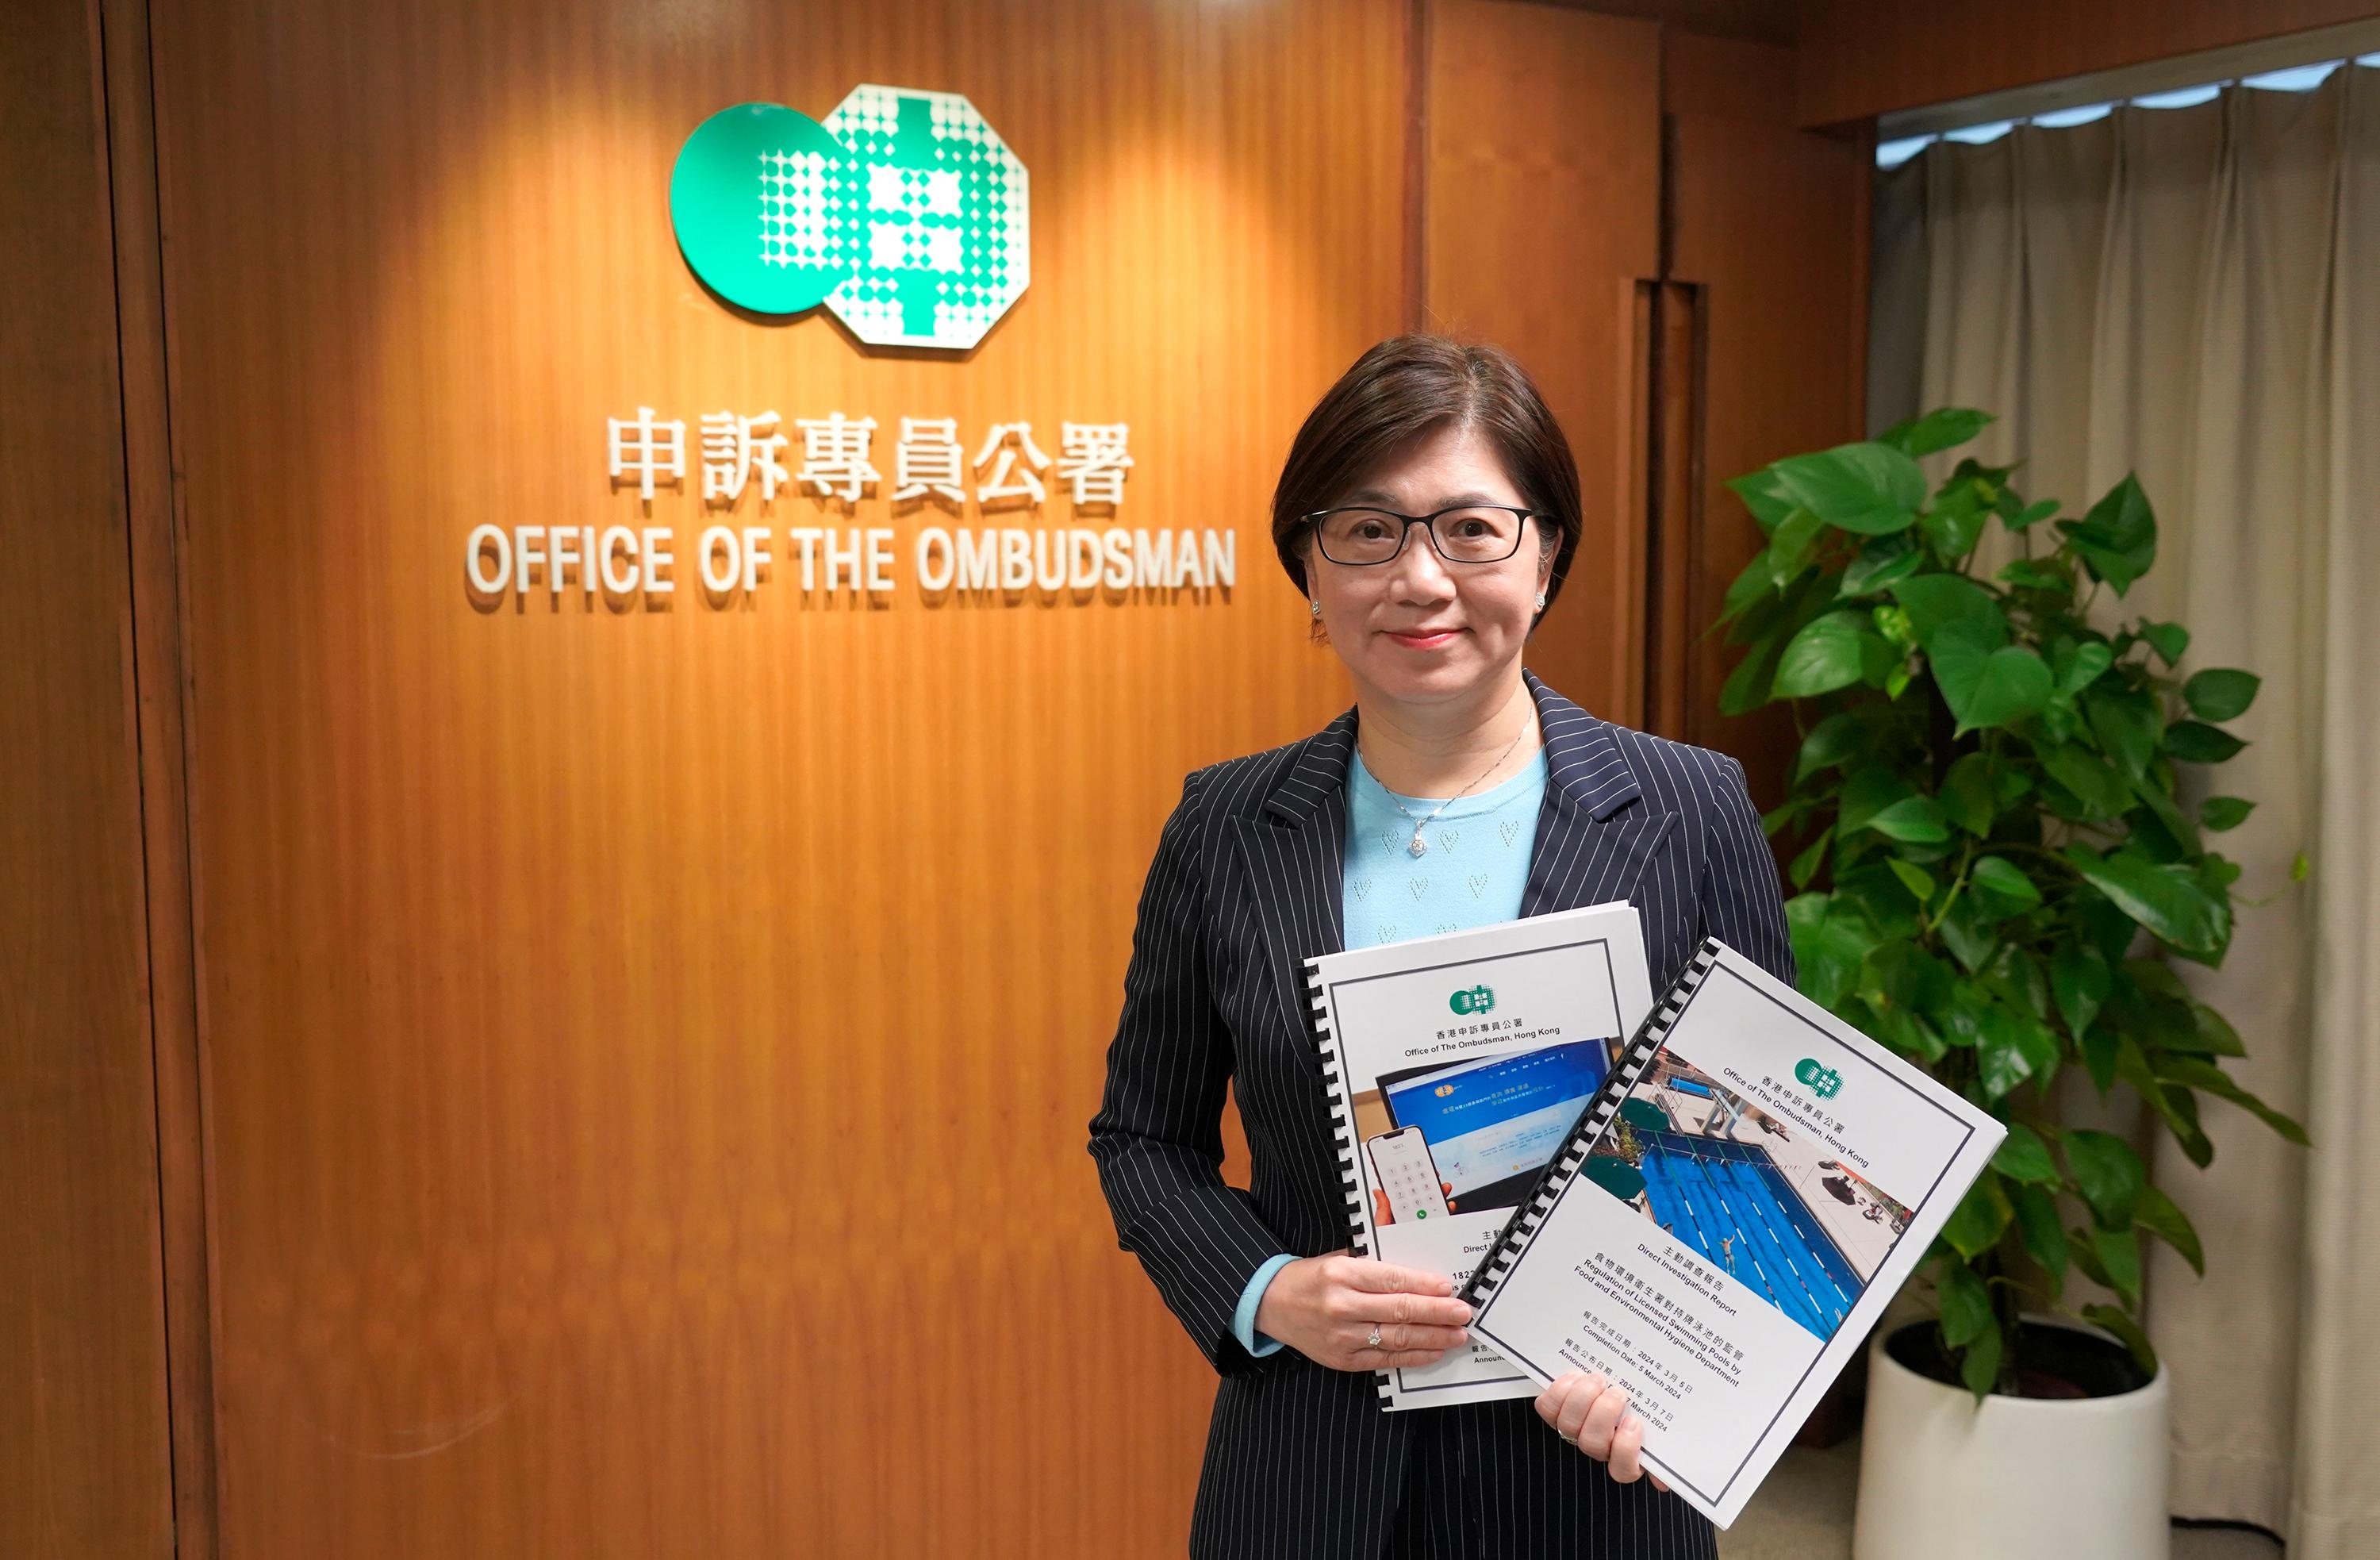 The Ombudsman, Ms Winnie Chiu, holds a press conference today (March 7) to announce the results of two direct investigations into the effectiveness of 1823 in handling complaints and enquiries and the regulation of licensed swimming pools by the Food and Environmental Hygiene Department.